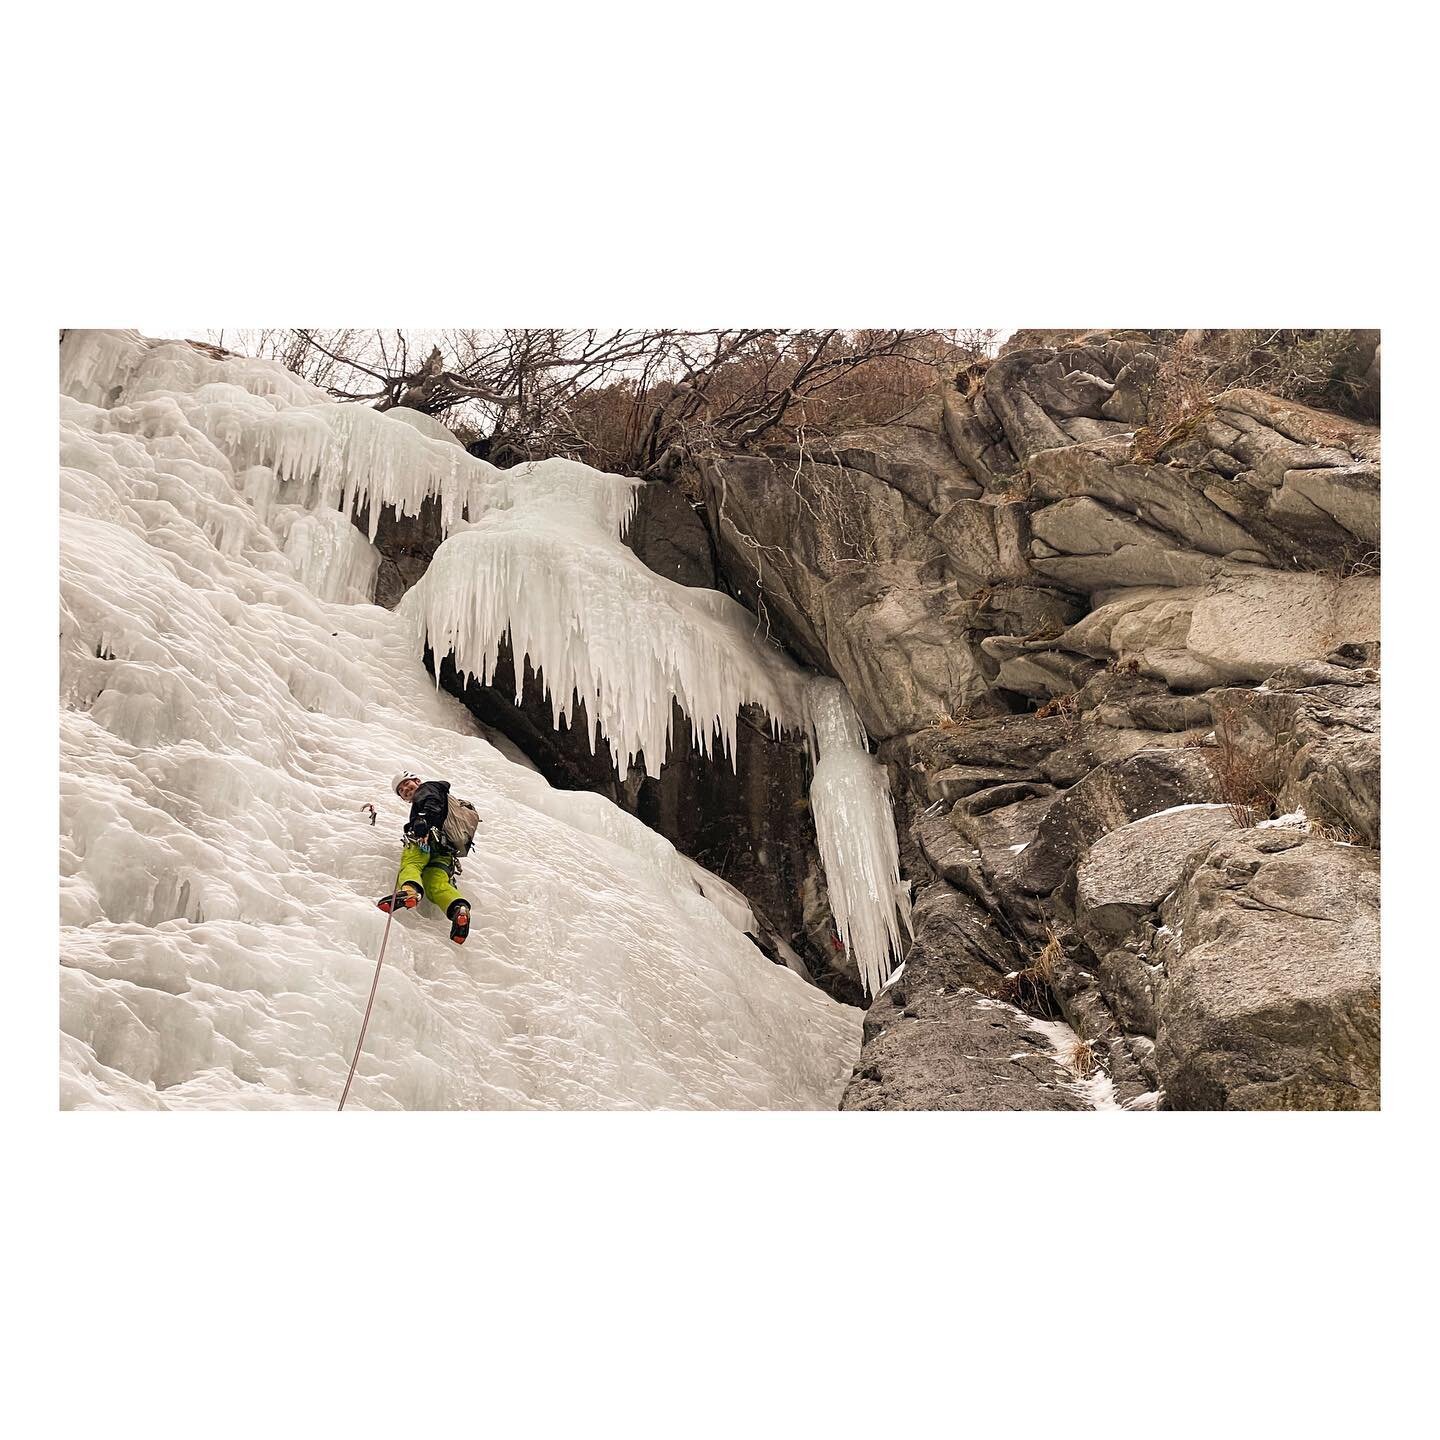 New directions, new movement 🏝⛏❄️ 
.
School has started to ramp up again in addition to research so I&rsquo;m back in the scramble of getting things sorted to find a good balance of things again. Yesterday I had the chance to do a quick lap up GWI w